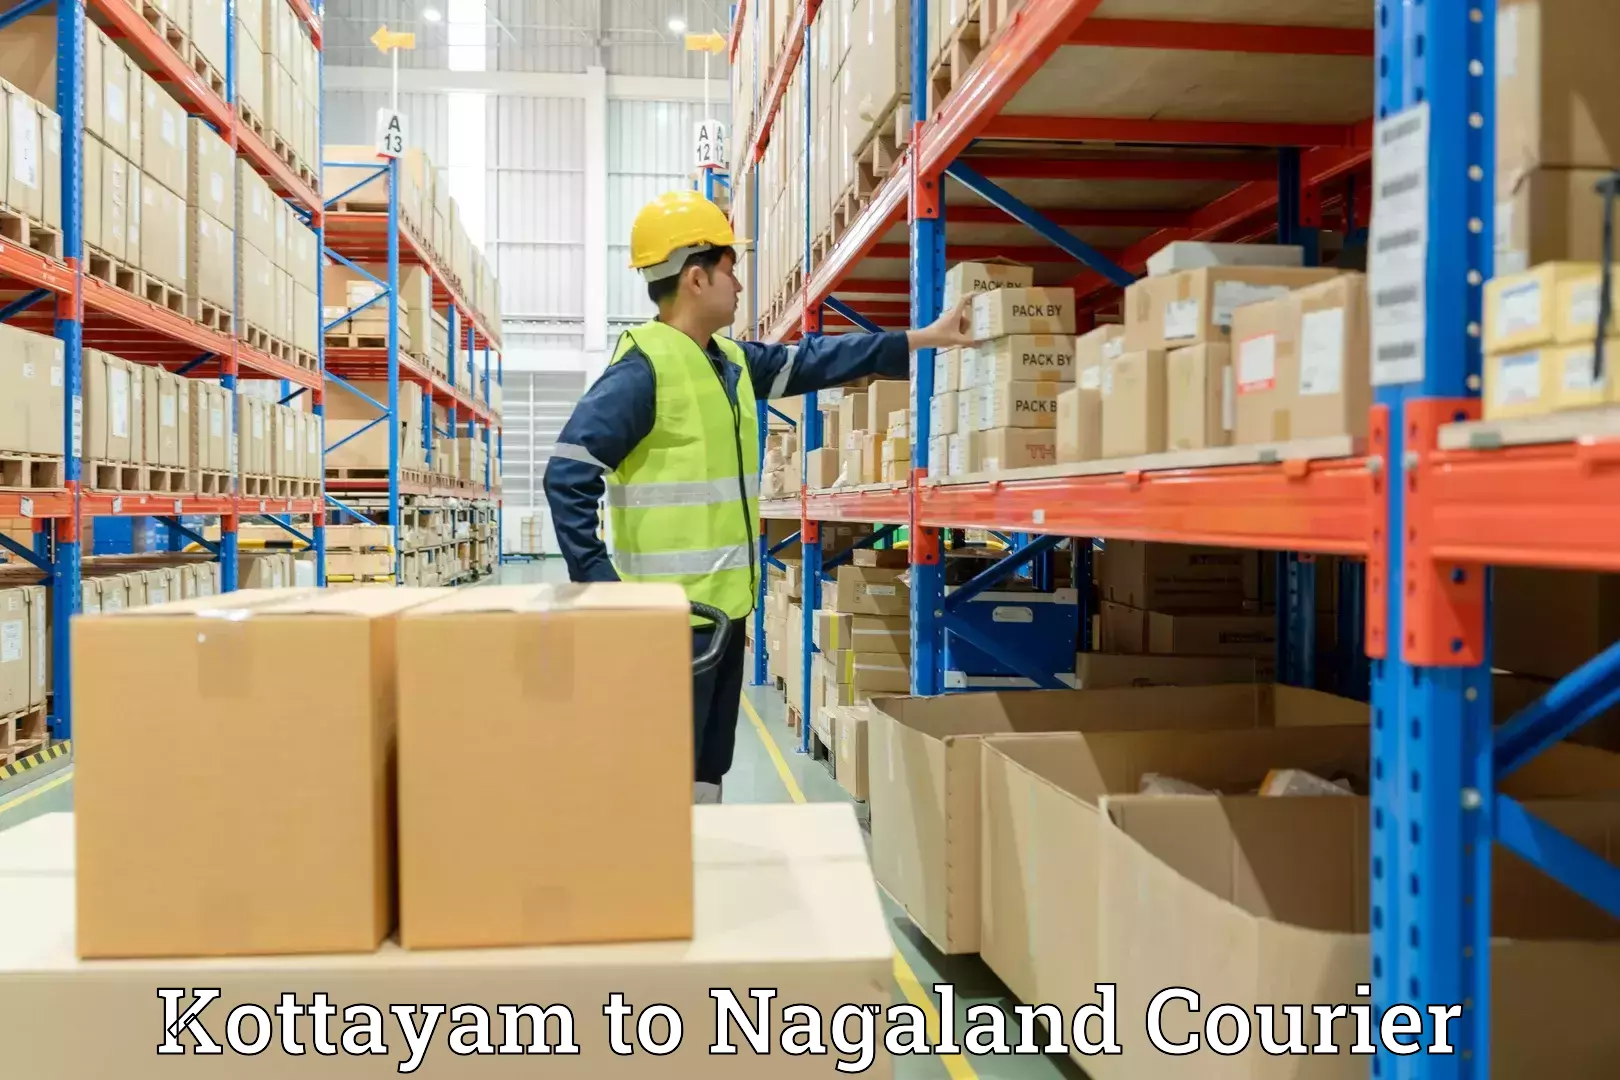 Furniture moving specialists Kottayam to Nagaland